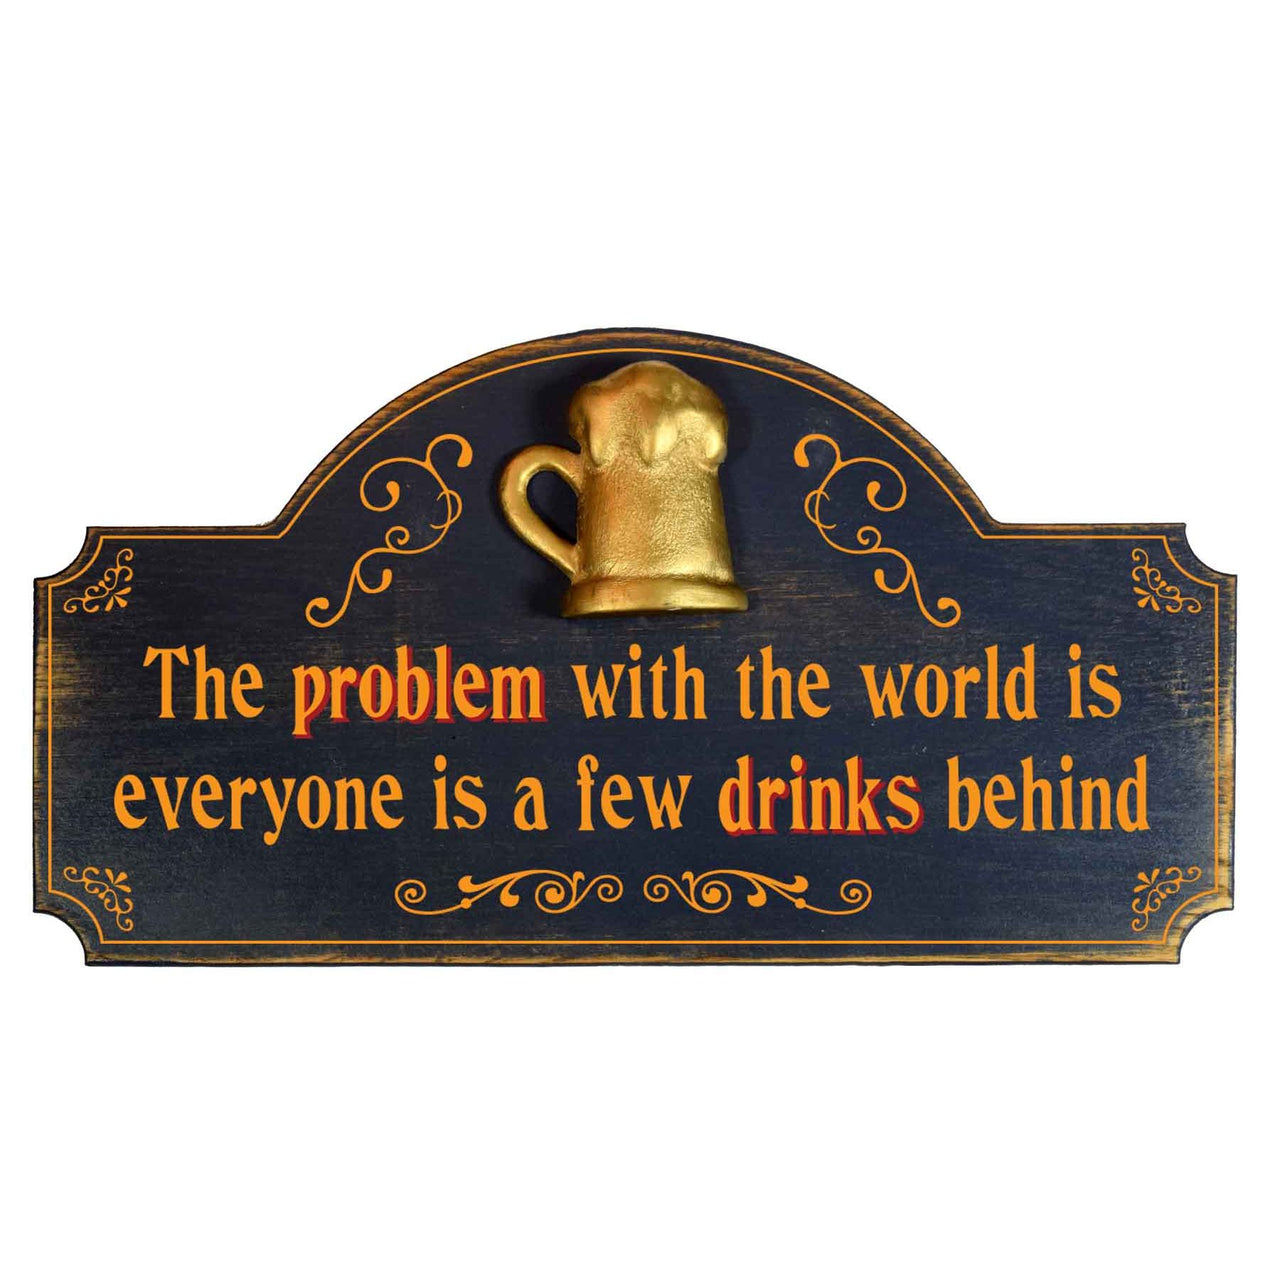 Drinks Behind | Problem with World | Humorous | 3D Relief | Words | 9" x 16"